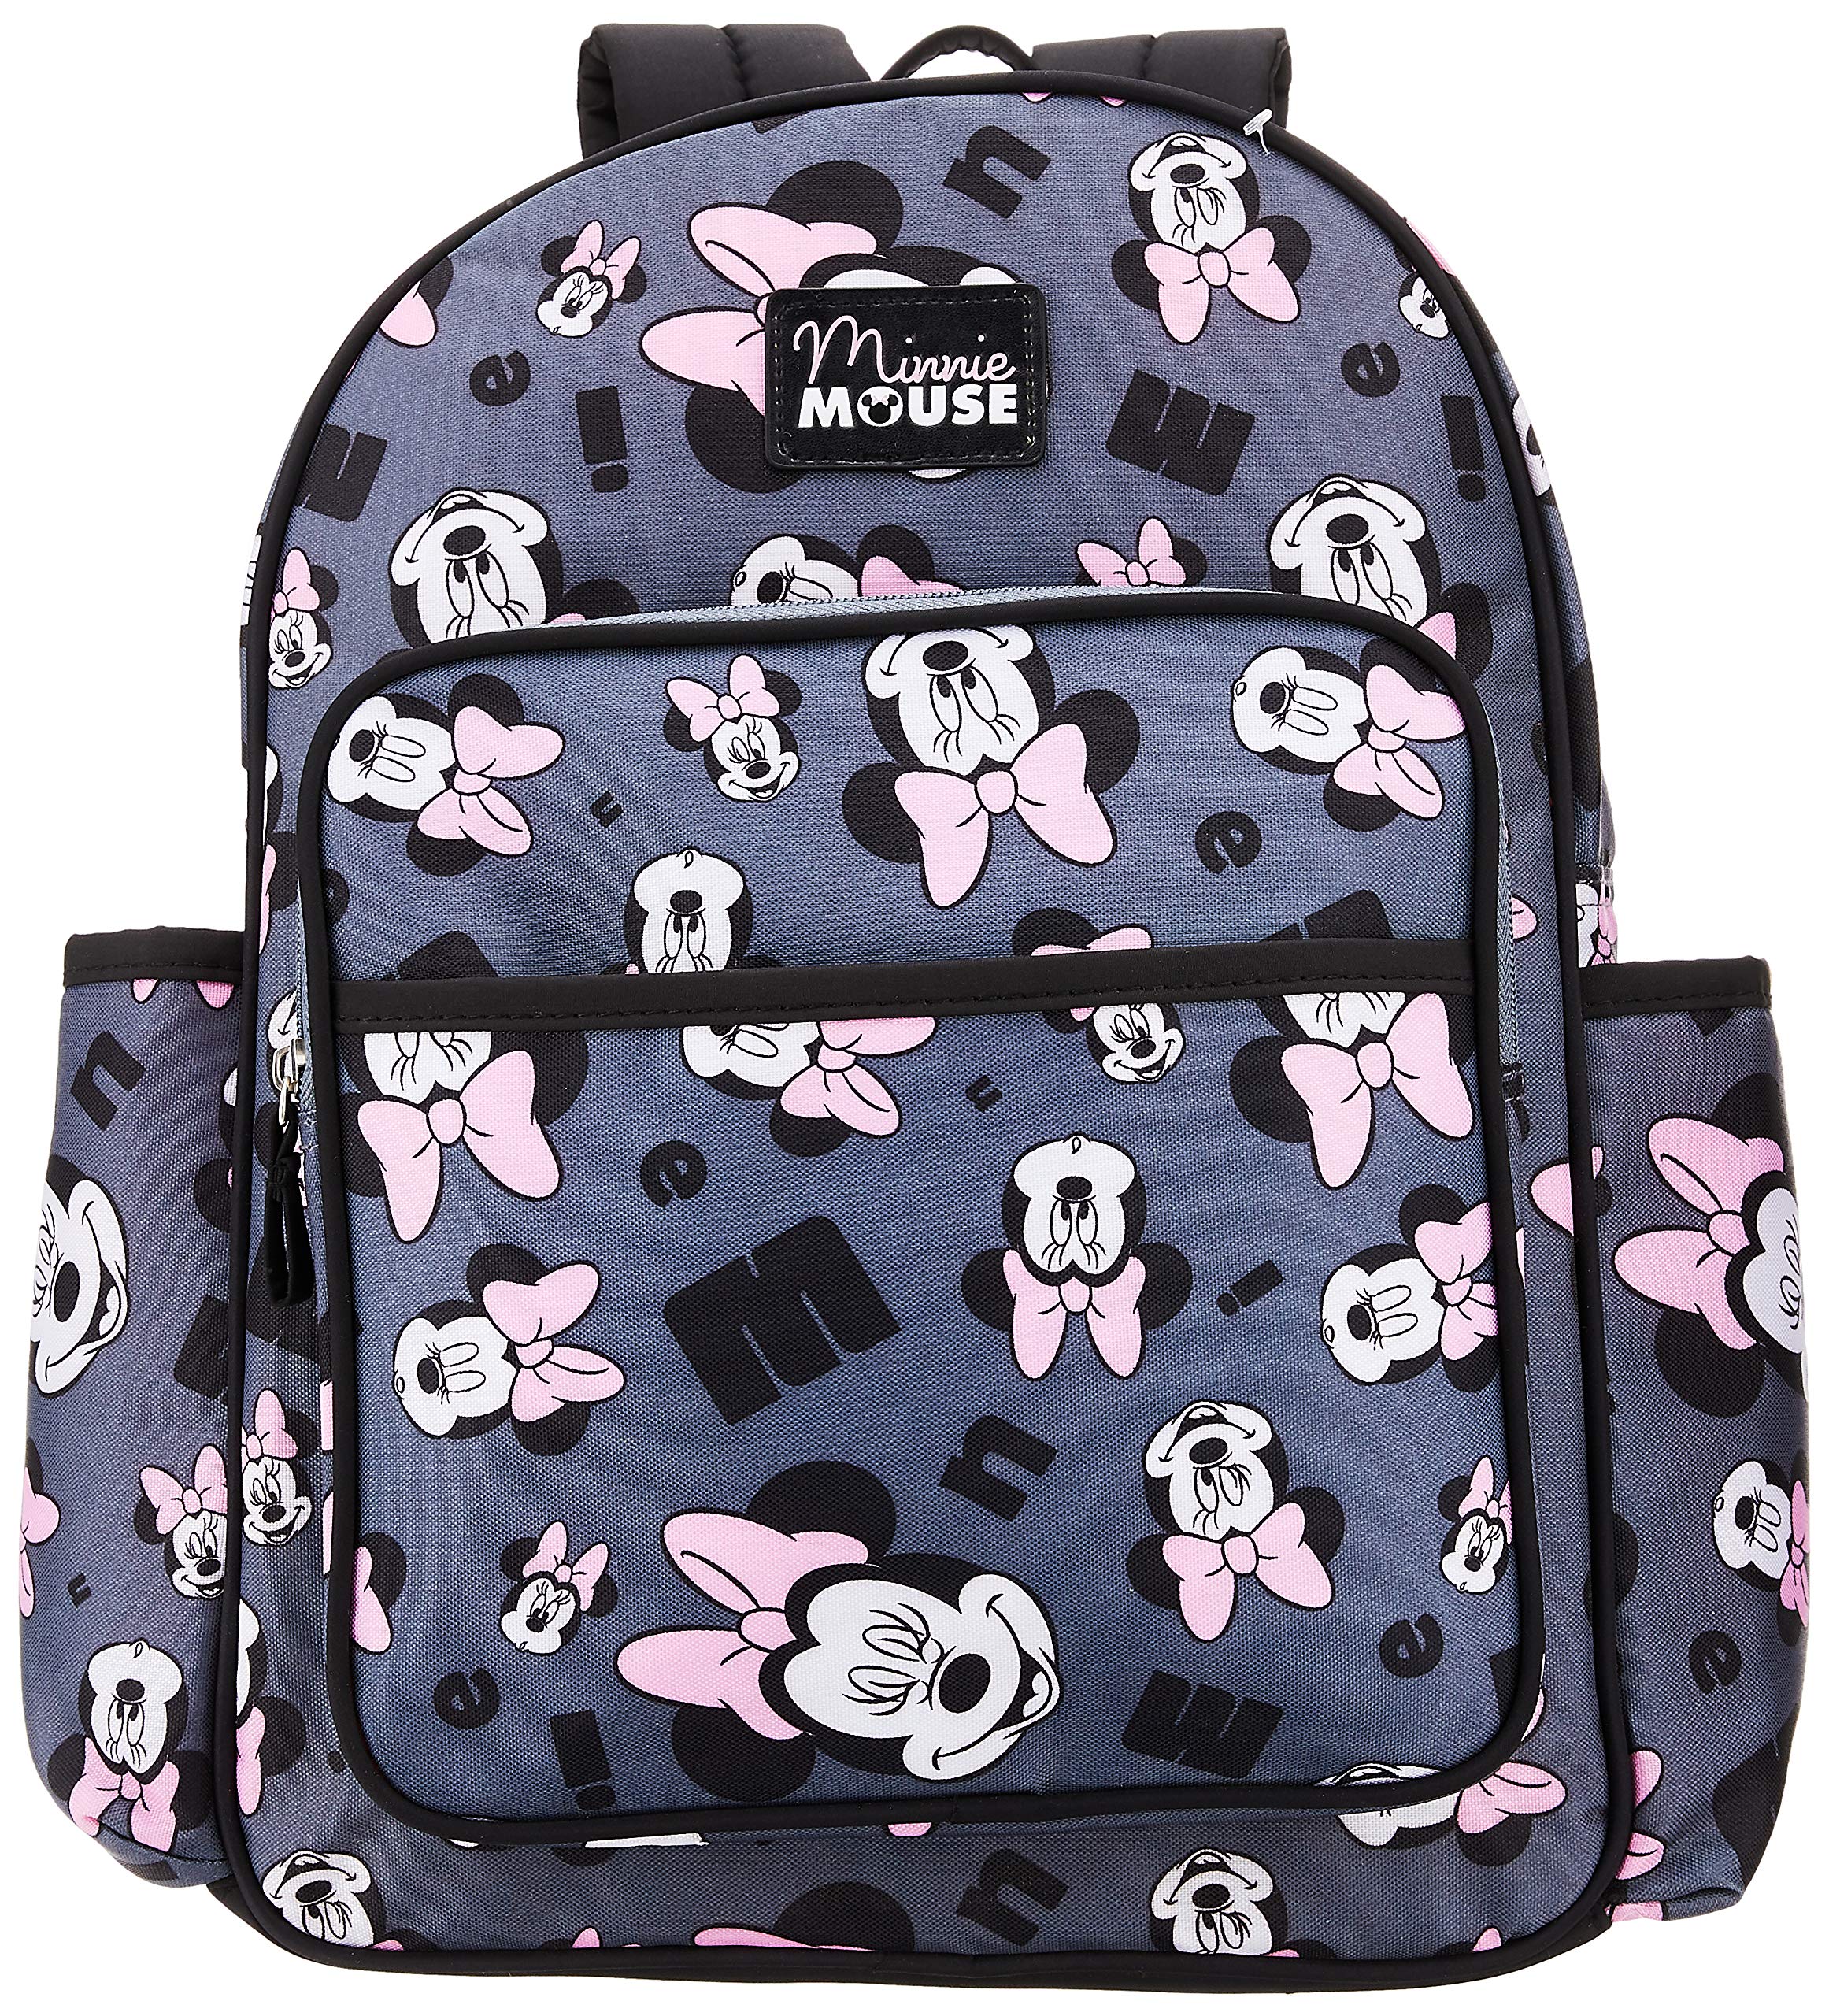 Book Cover Disney Minnie Mouse Toss Head Print Backpack Diaper Bag, Grey